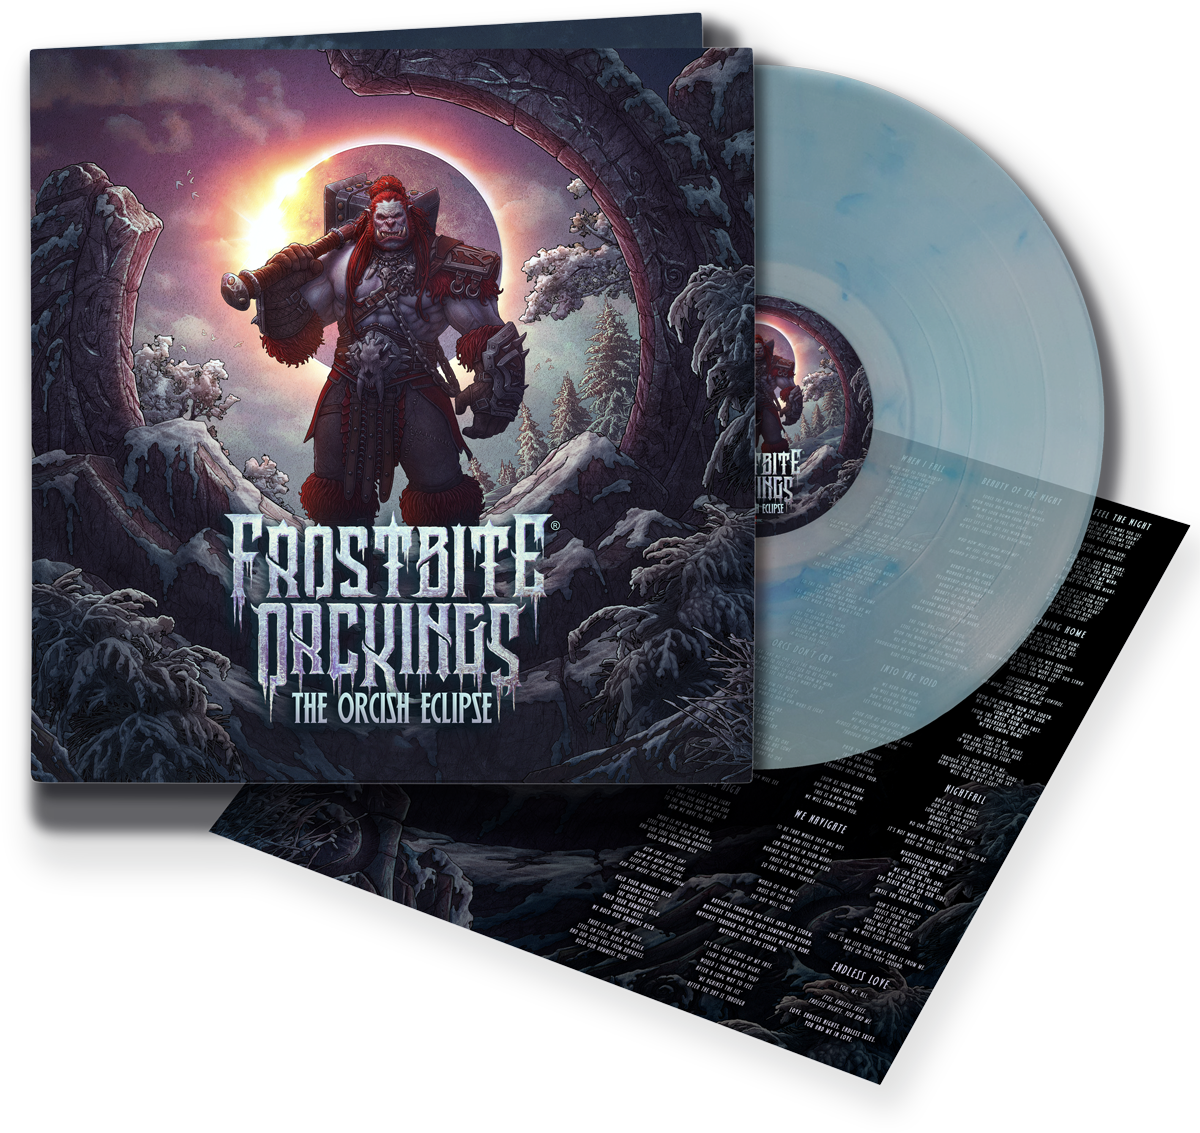 Frostbite Orckings - The Orcish Eclipse - LP - multicolor - EMP Exklusiv!